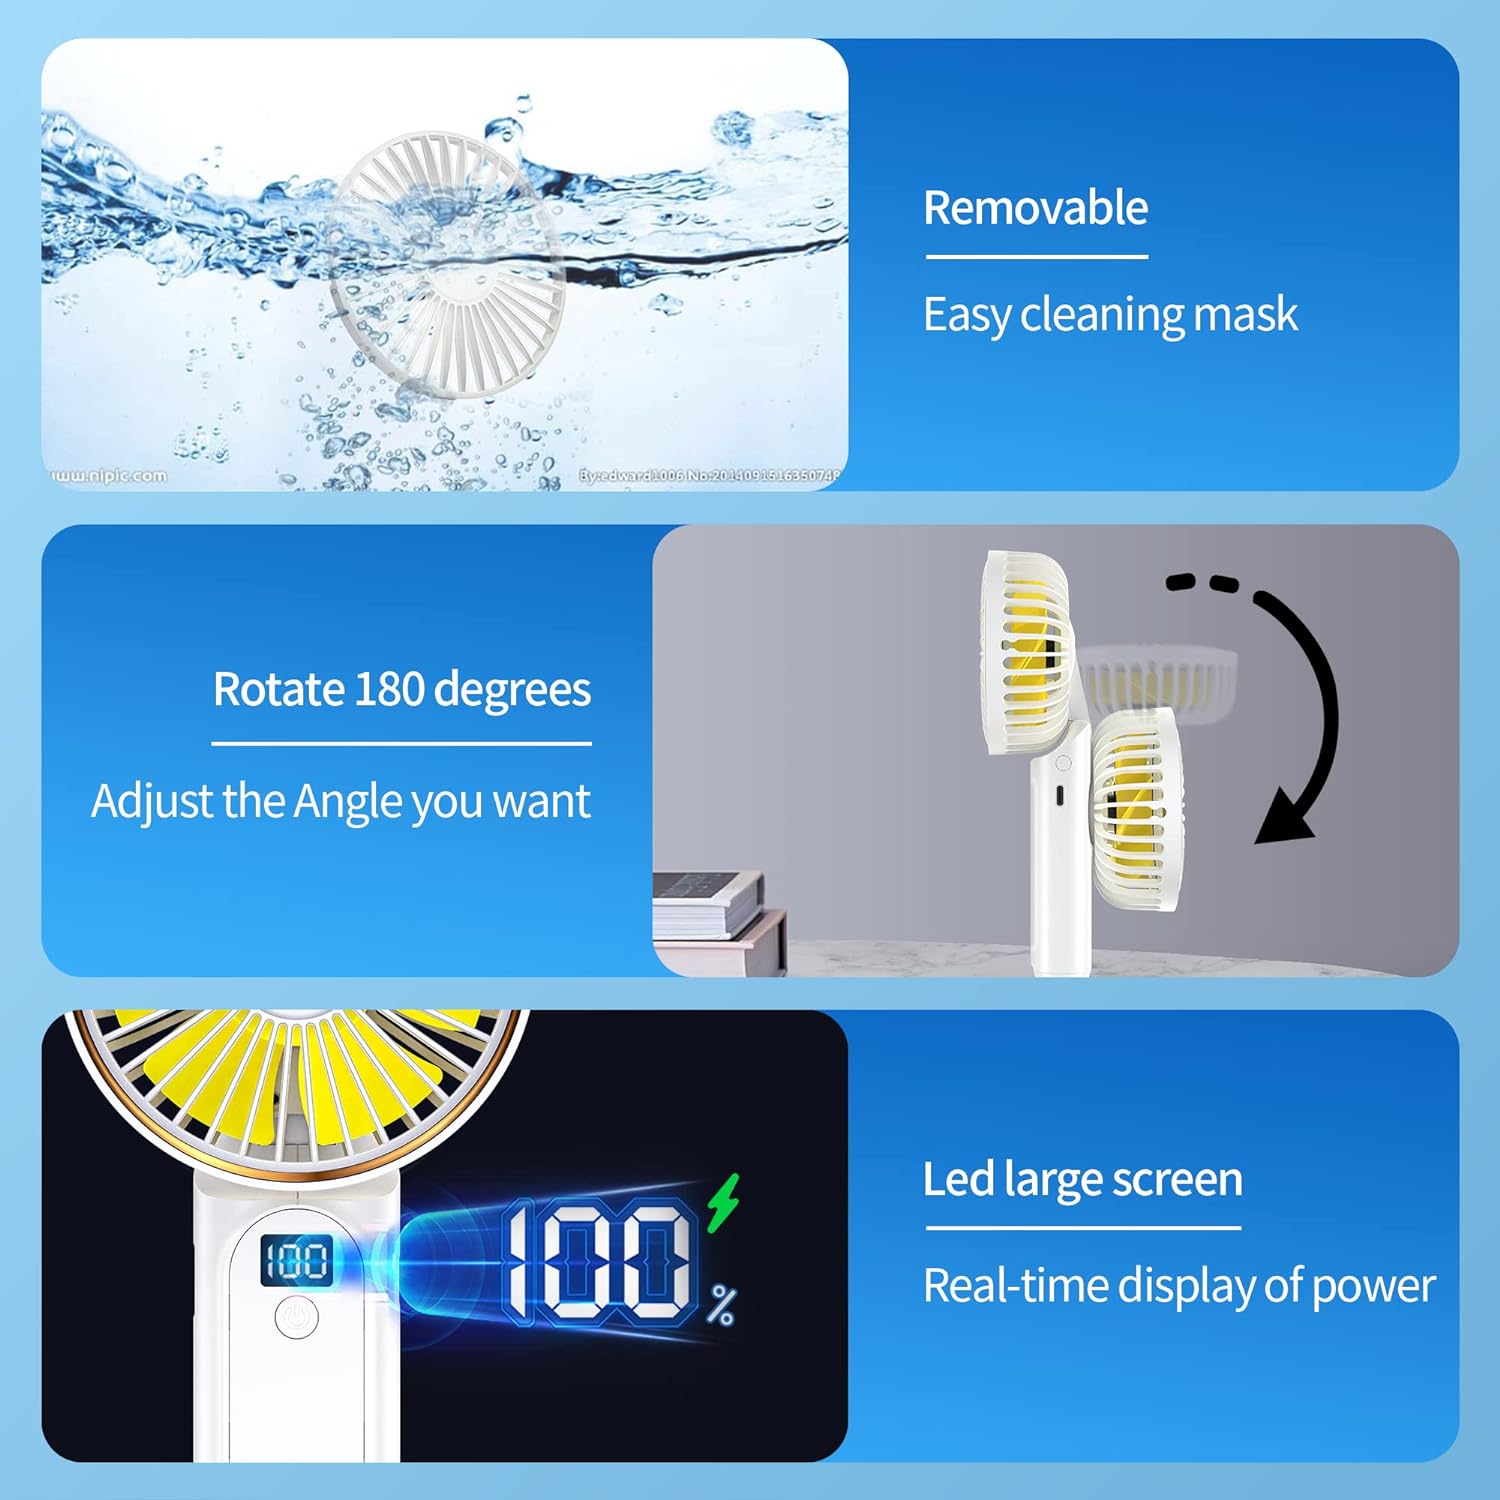 Peiyuu Portable Handheld Fan, Neck Fan, Mini Desk Fan, 4000mAh Long Battery Life, USB Can Charge Mobile Phones, Extremely Quiet, Safe and Reliable, 6-Speed Visual Adjustment(White)